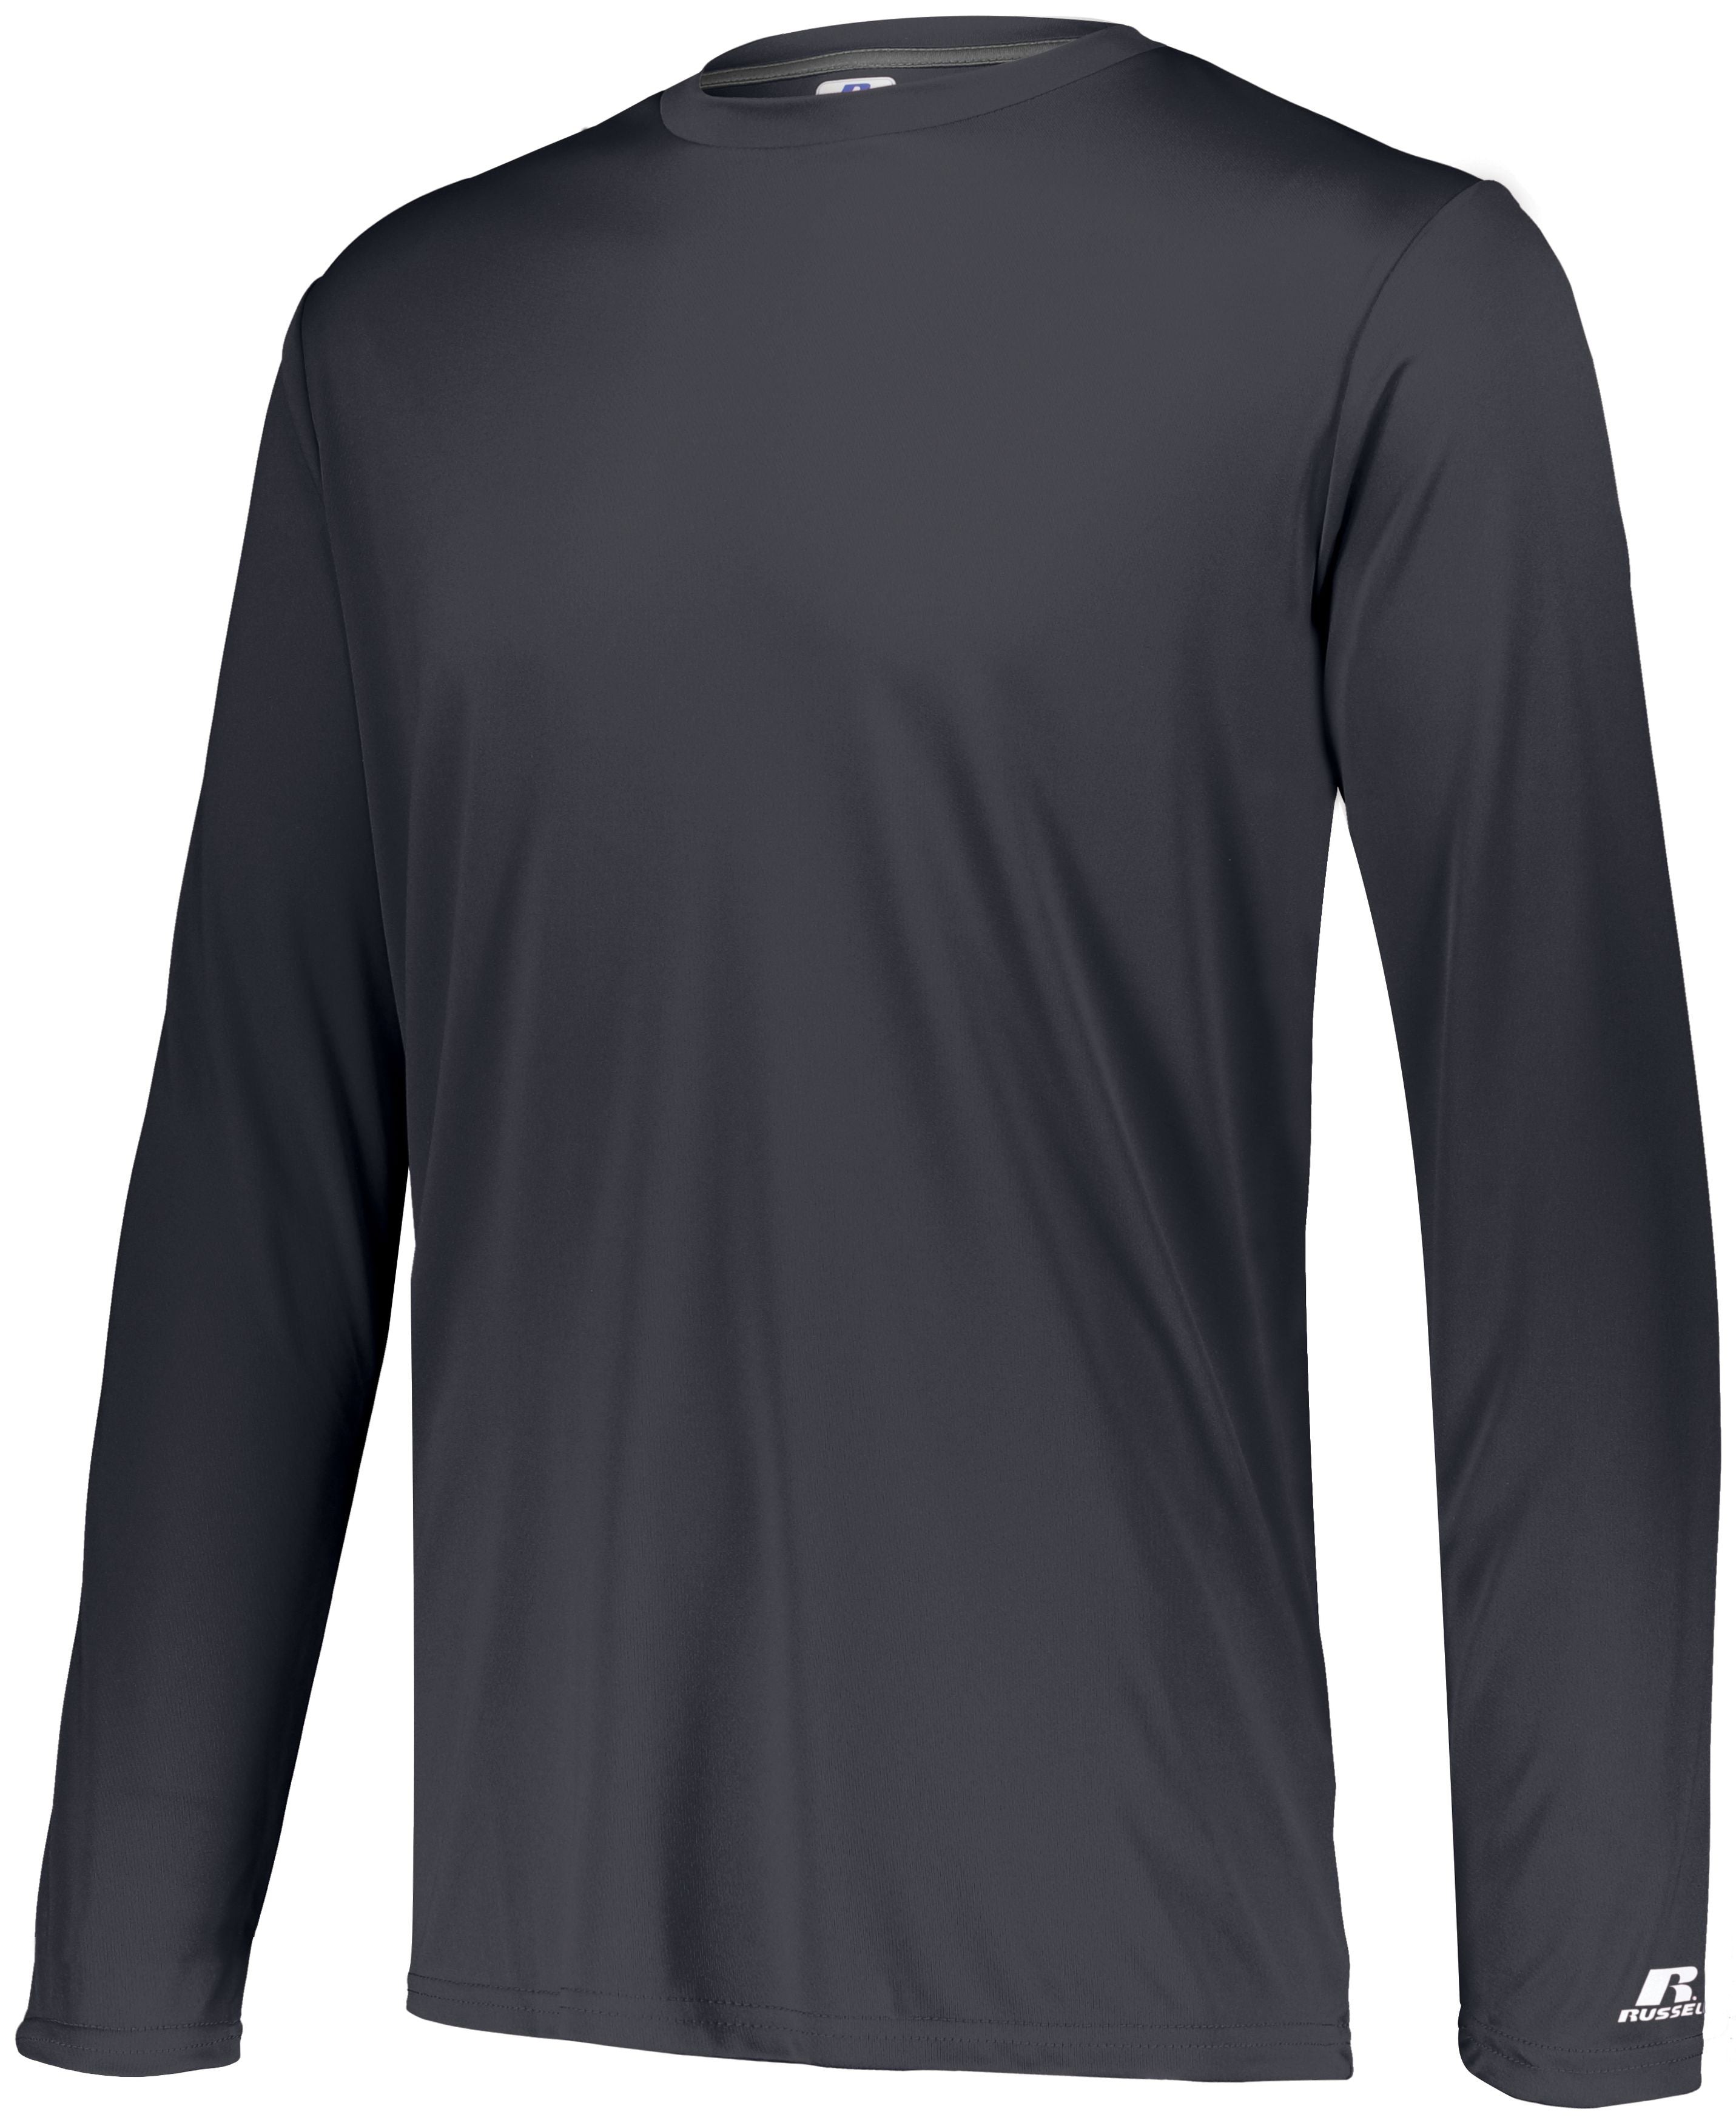 Russell Athletic Dri-Power Core Performance Long Sleeve Tee in Stealth  -Part of the Adult, Adult-Tee-Shirt, T-Shirts, Russell-Athletic-Products, Shirts product lines at KanaleyCreations.com